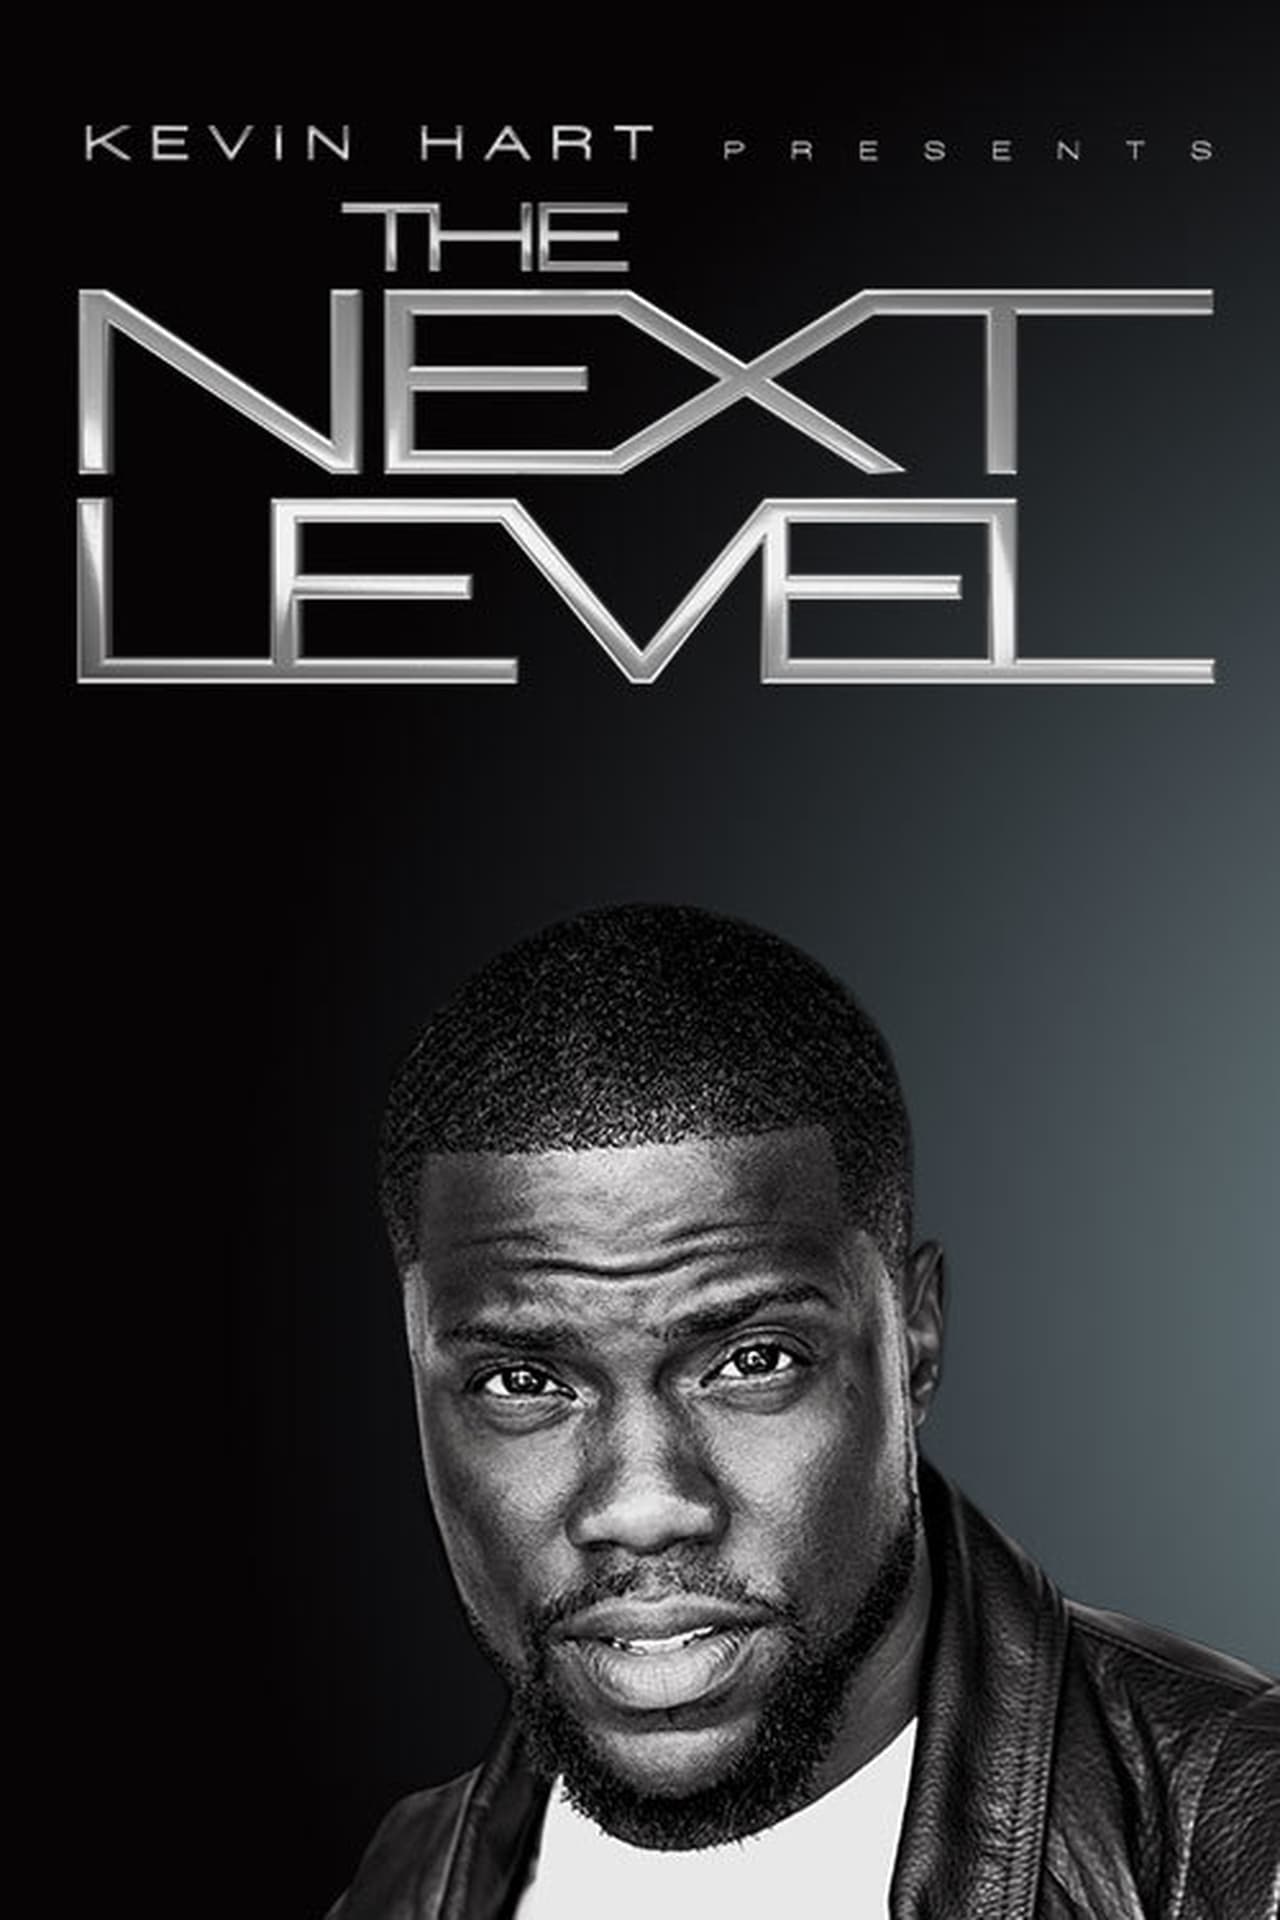 Kevin Hart Presents: The Next Level (2017)